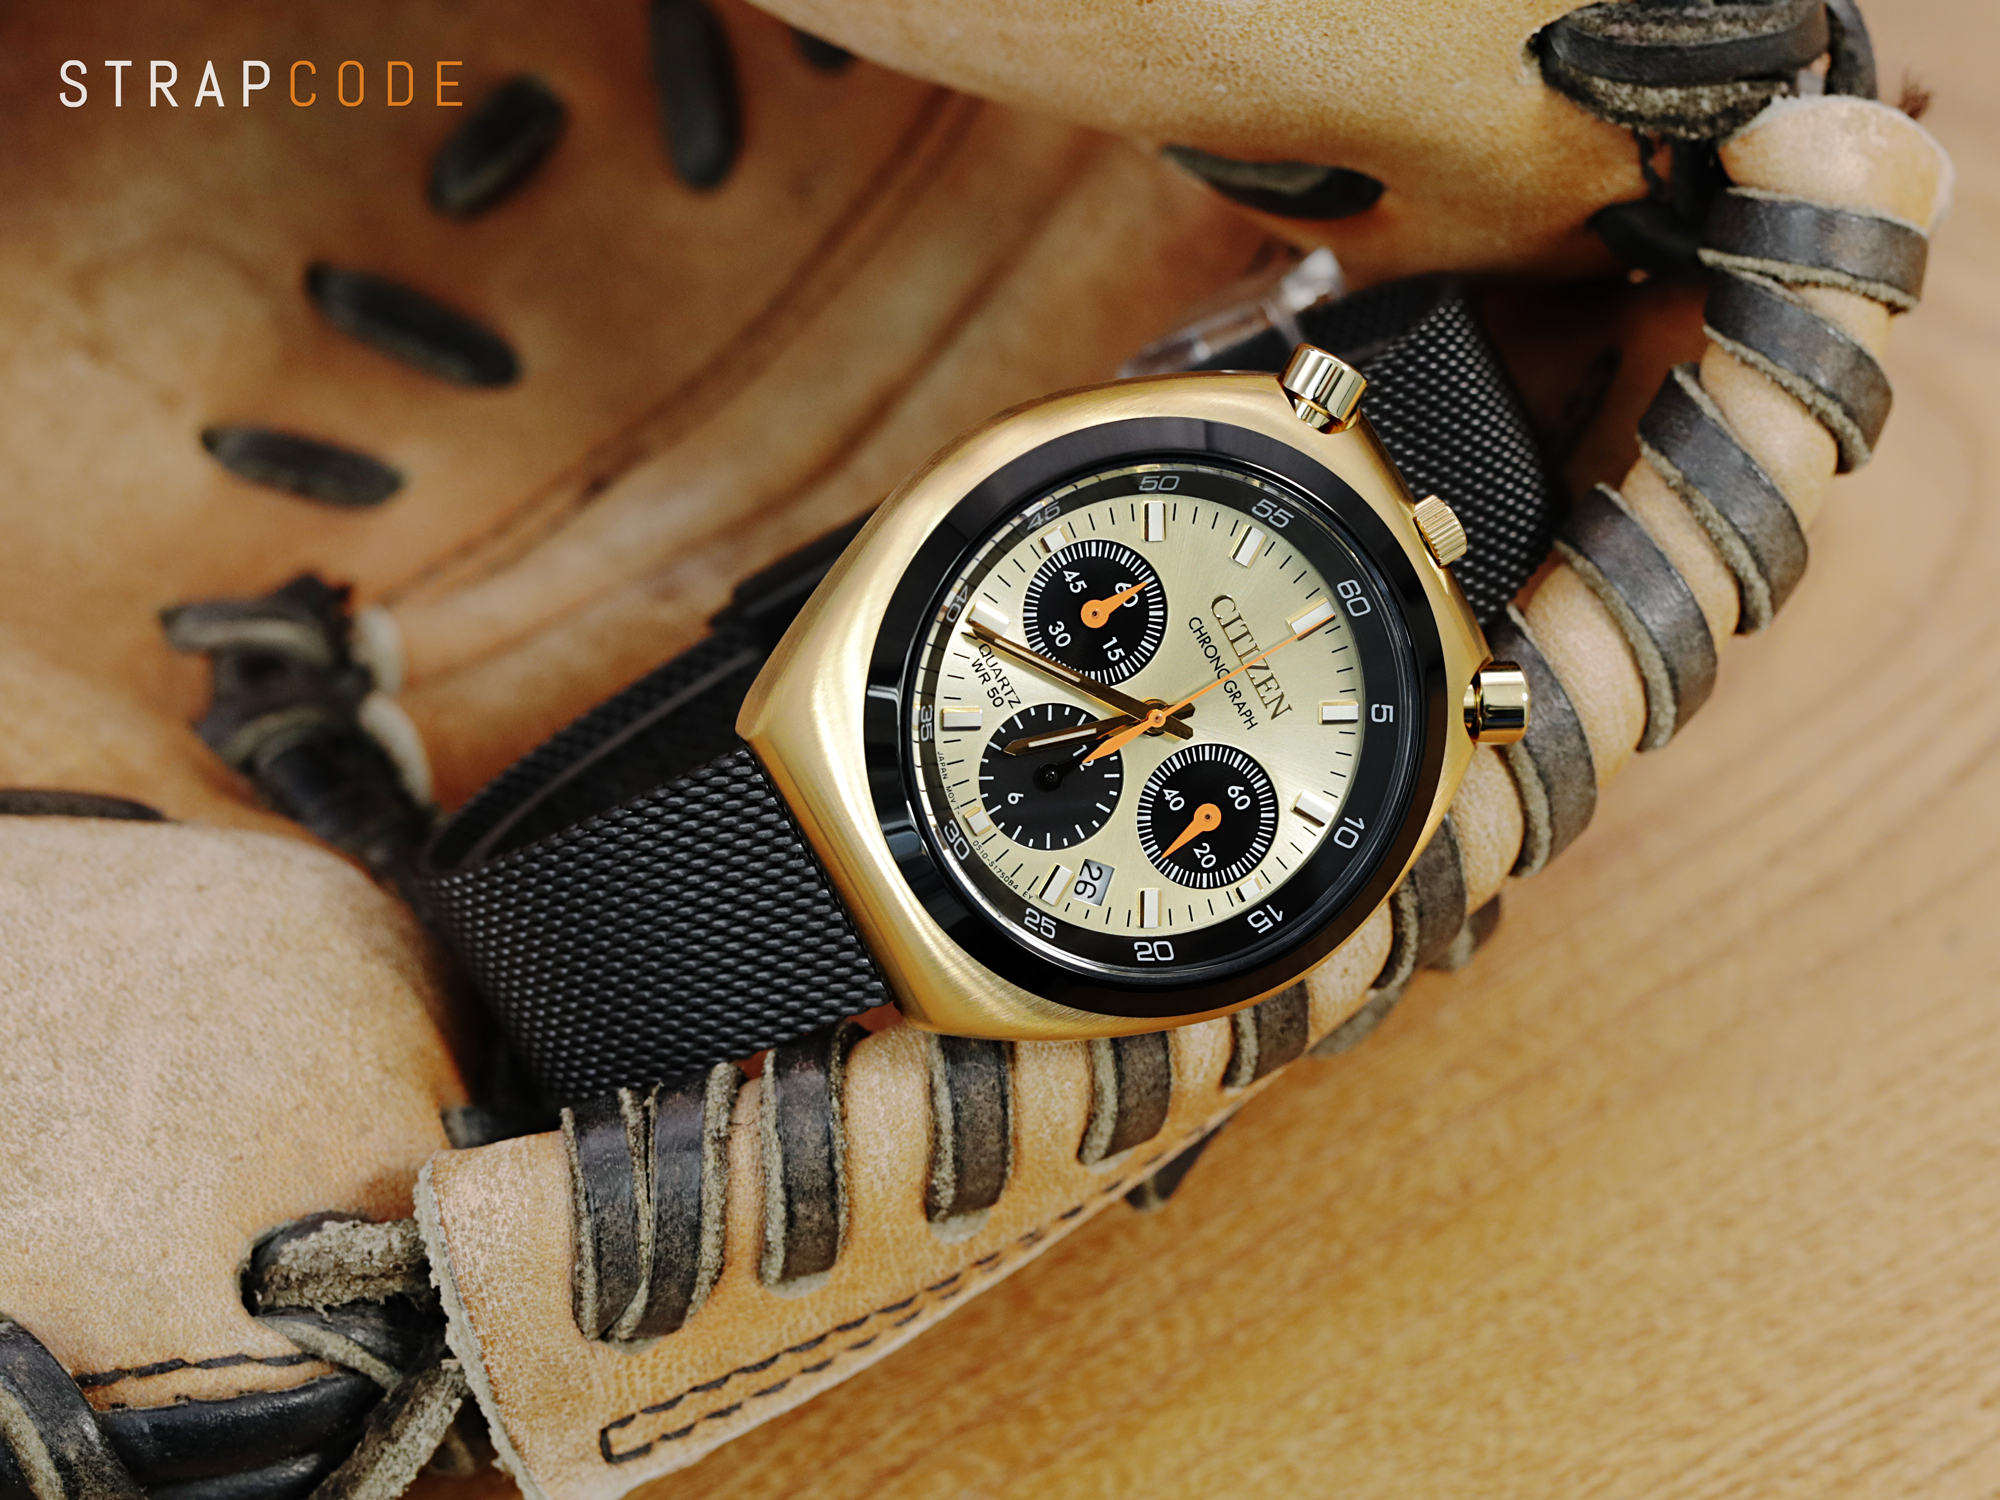 Vintage watch | Strapcode Watch Bands